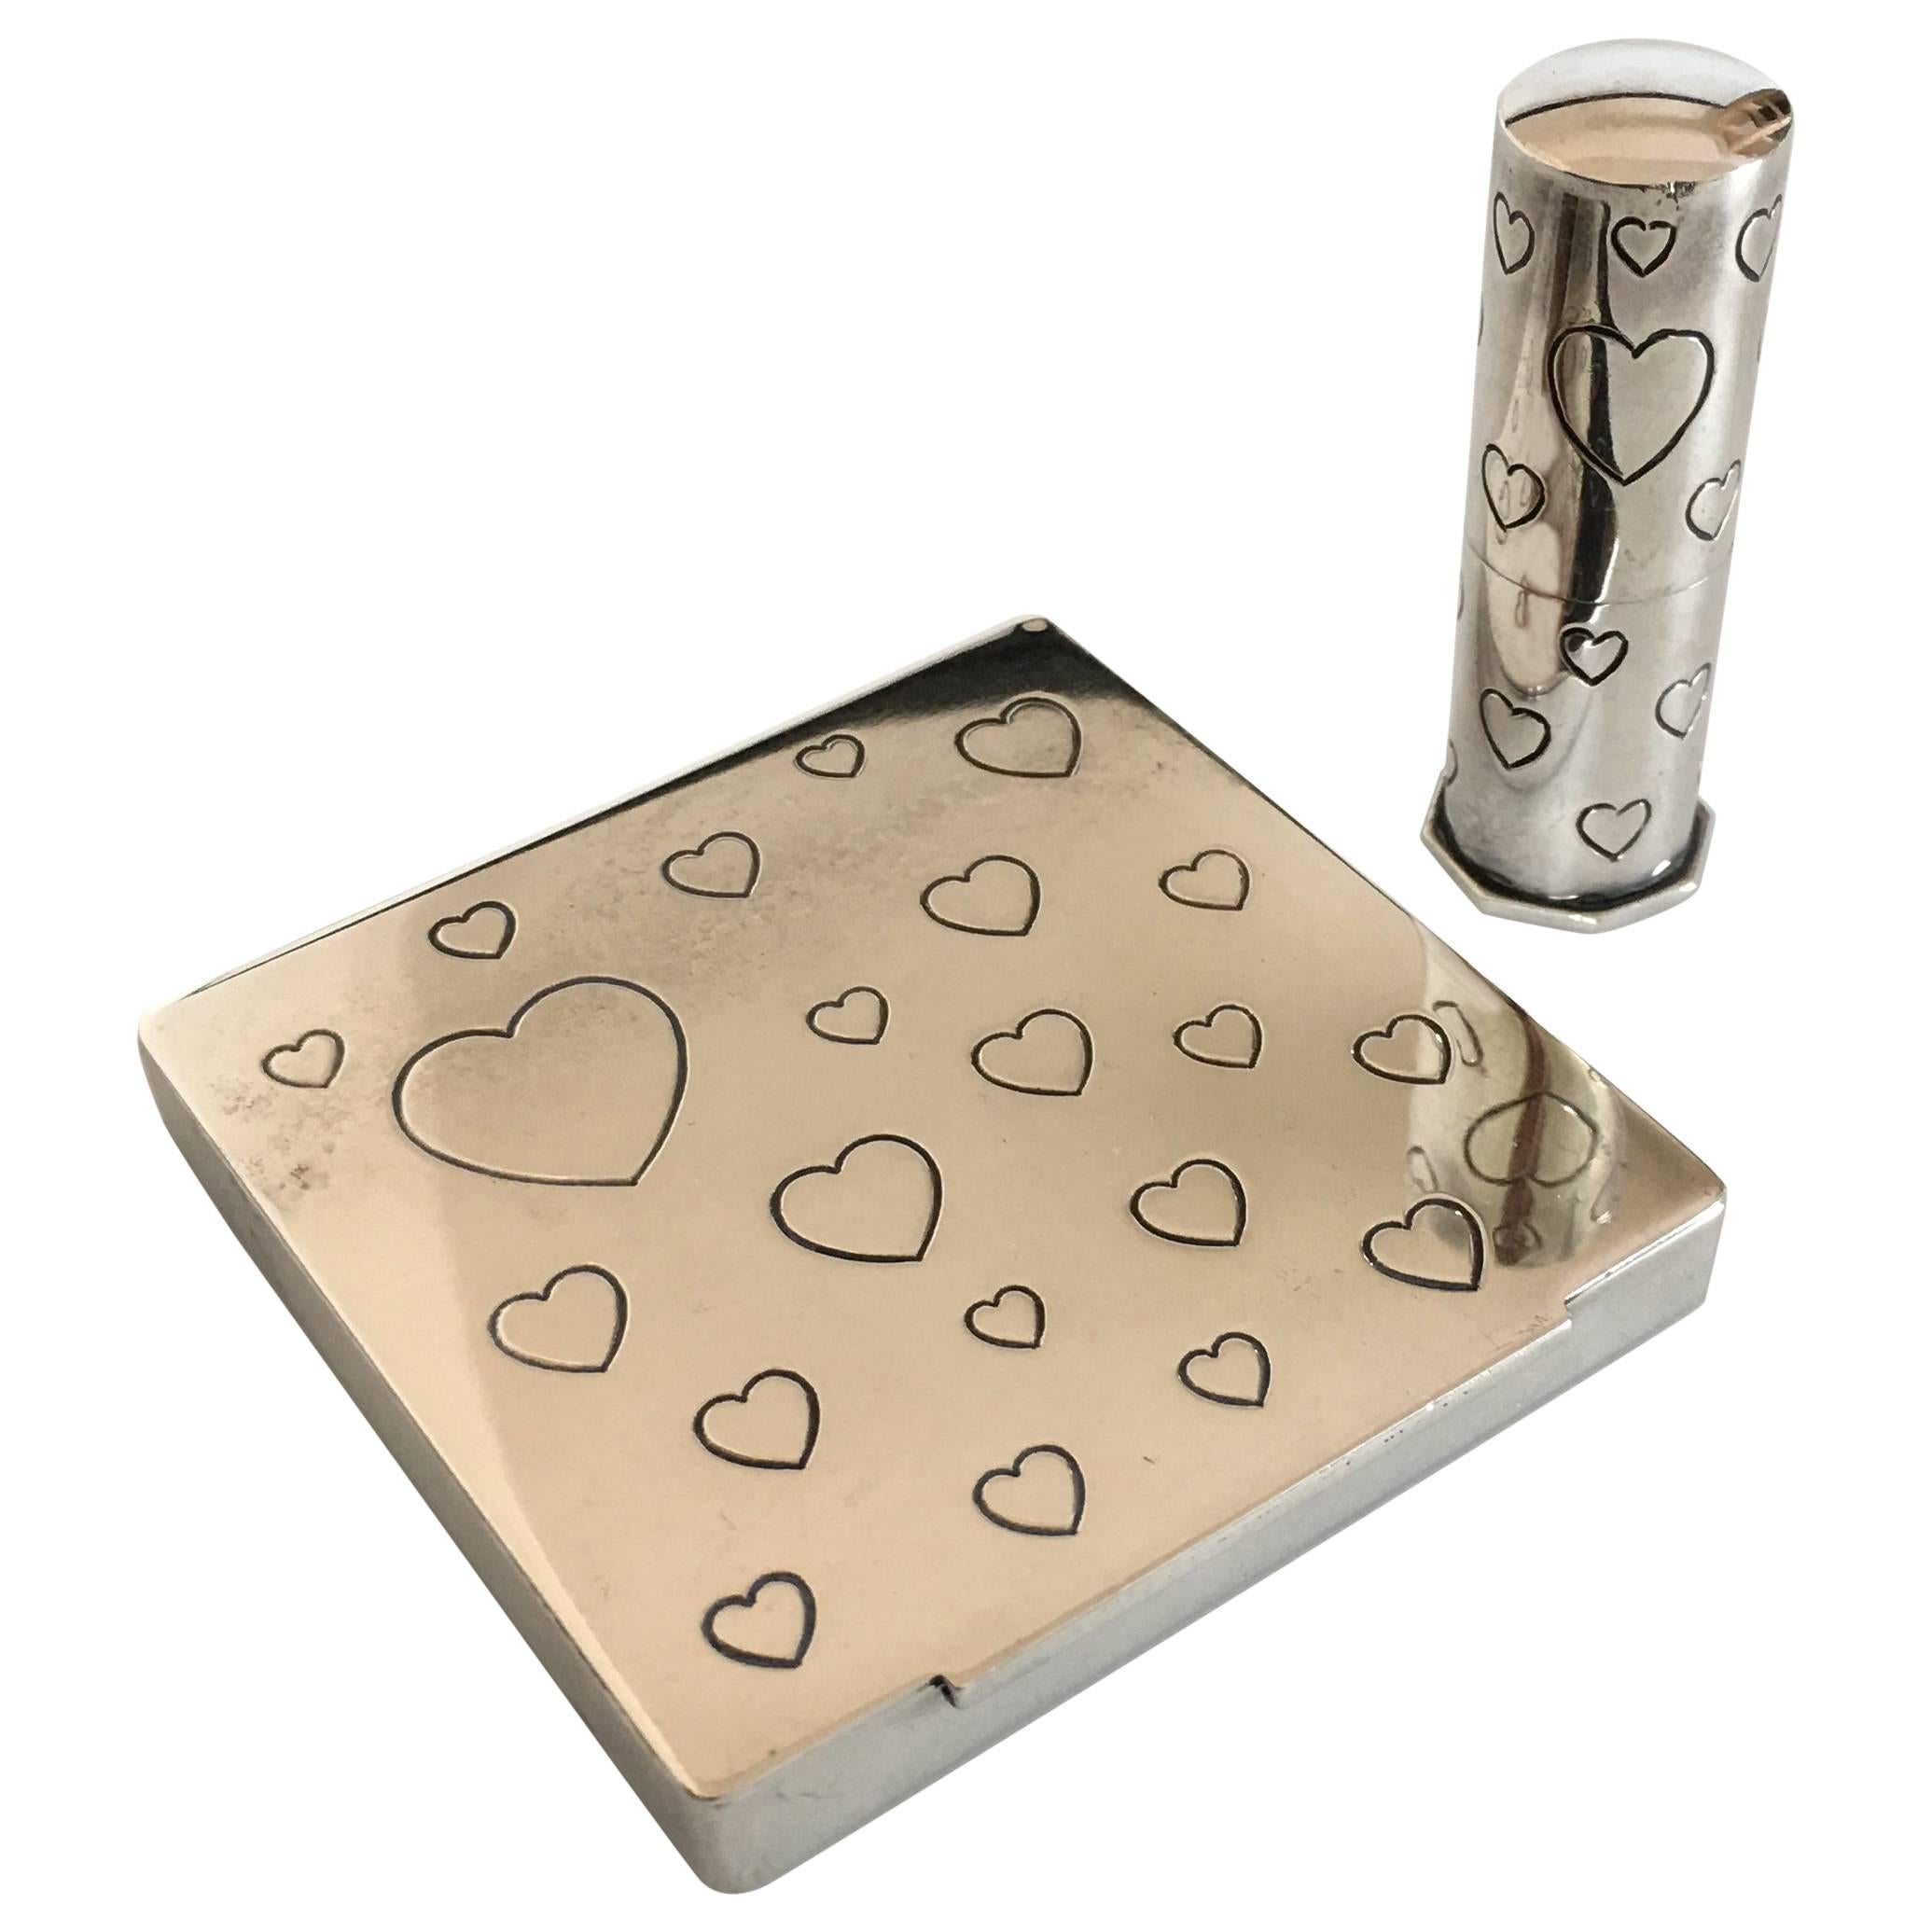 Powder and Mirror Case and Lipstick Case in Silver Ornamented with Hearts